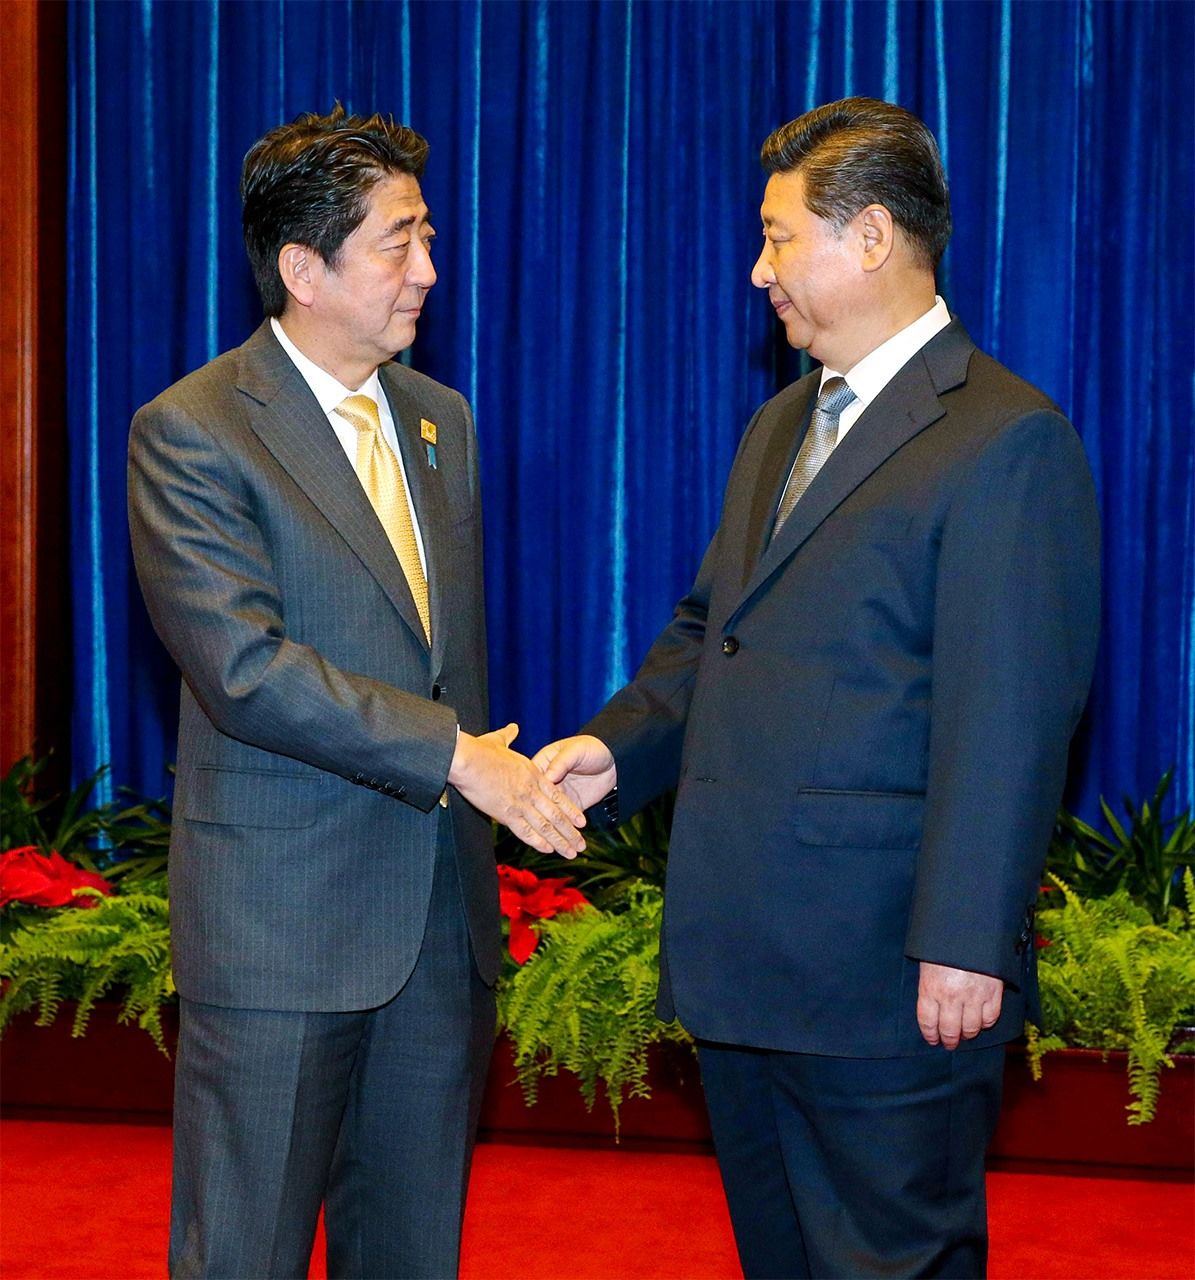 Xi Jinping, right, and Abe Shinzō shake hands after their brief summit meeting at the Great Hall of the People in Beijing on November 10, 2014. (© Jiji) 